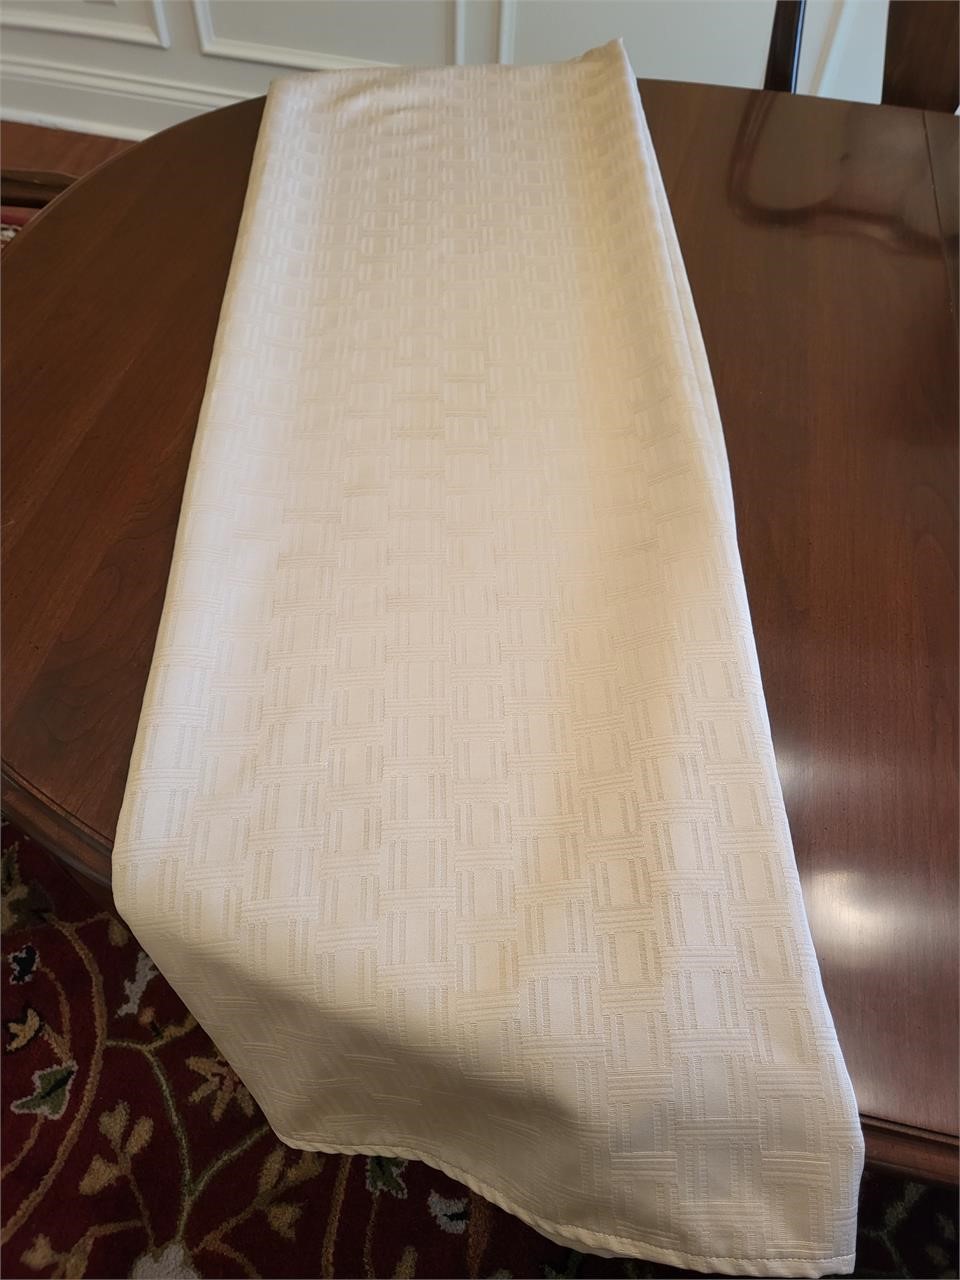 60"x102" Formal Dining Tablecloth